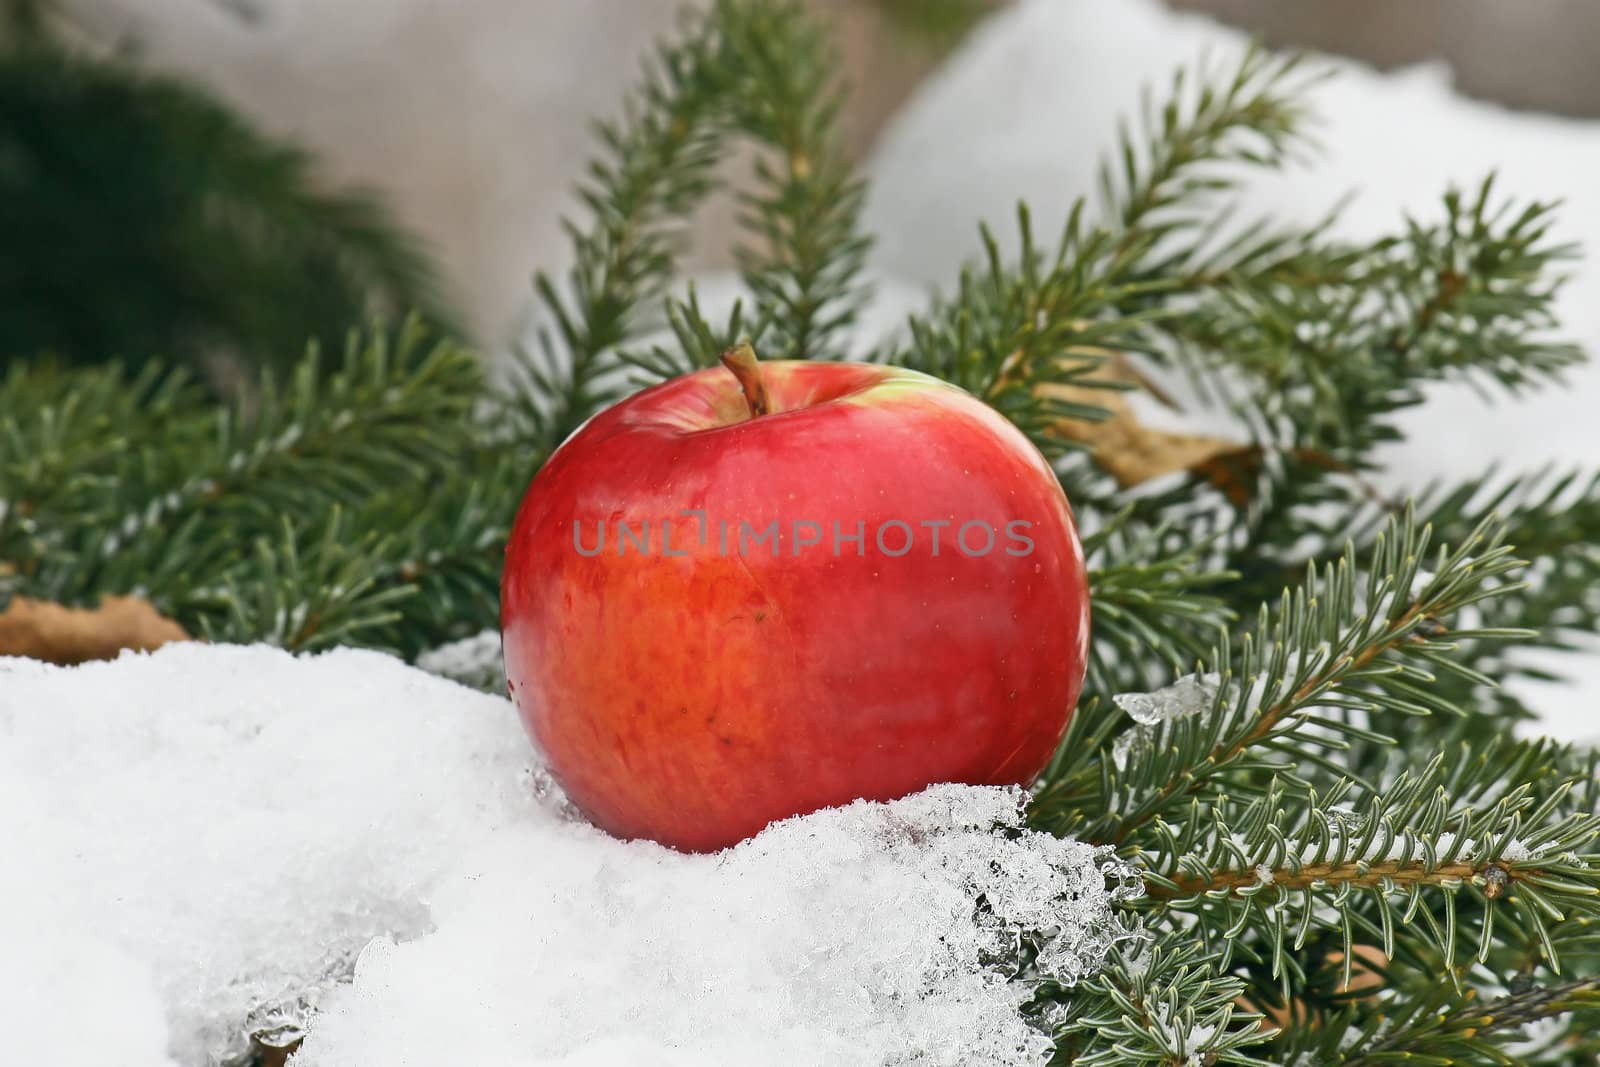 On a pine branch, among green needles the big red apple lies. Nearby on a branch a heap of snow.
